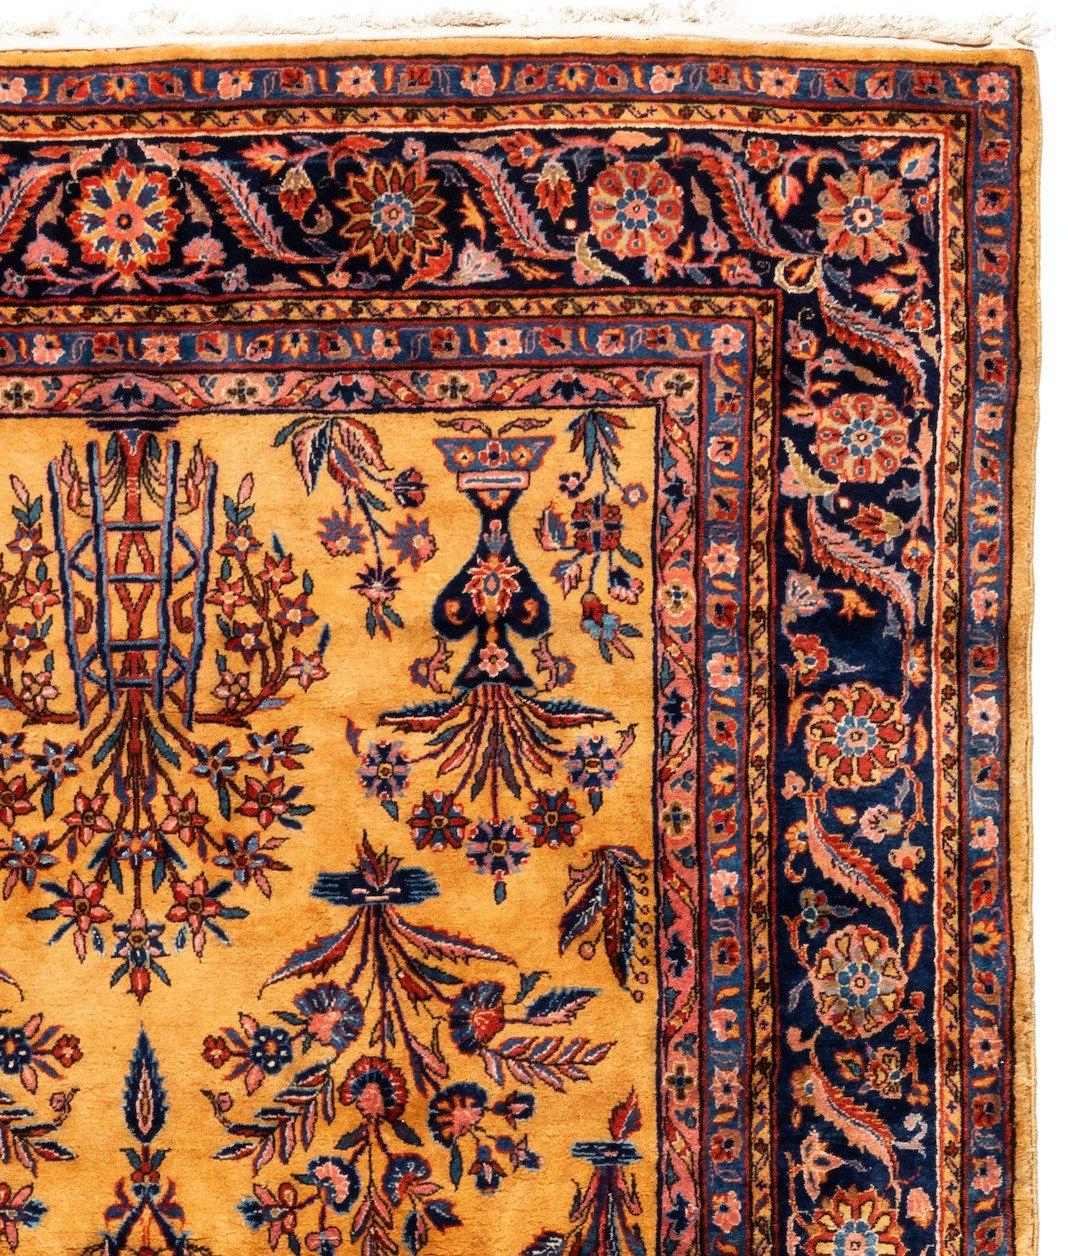 Hand-Woven Antique Gold Navy Persian Manchester Wool Kashan Rug, circa 1880-1900 For Sale